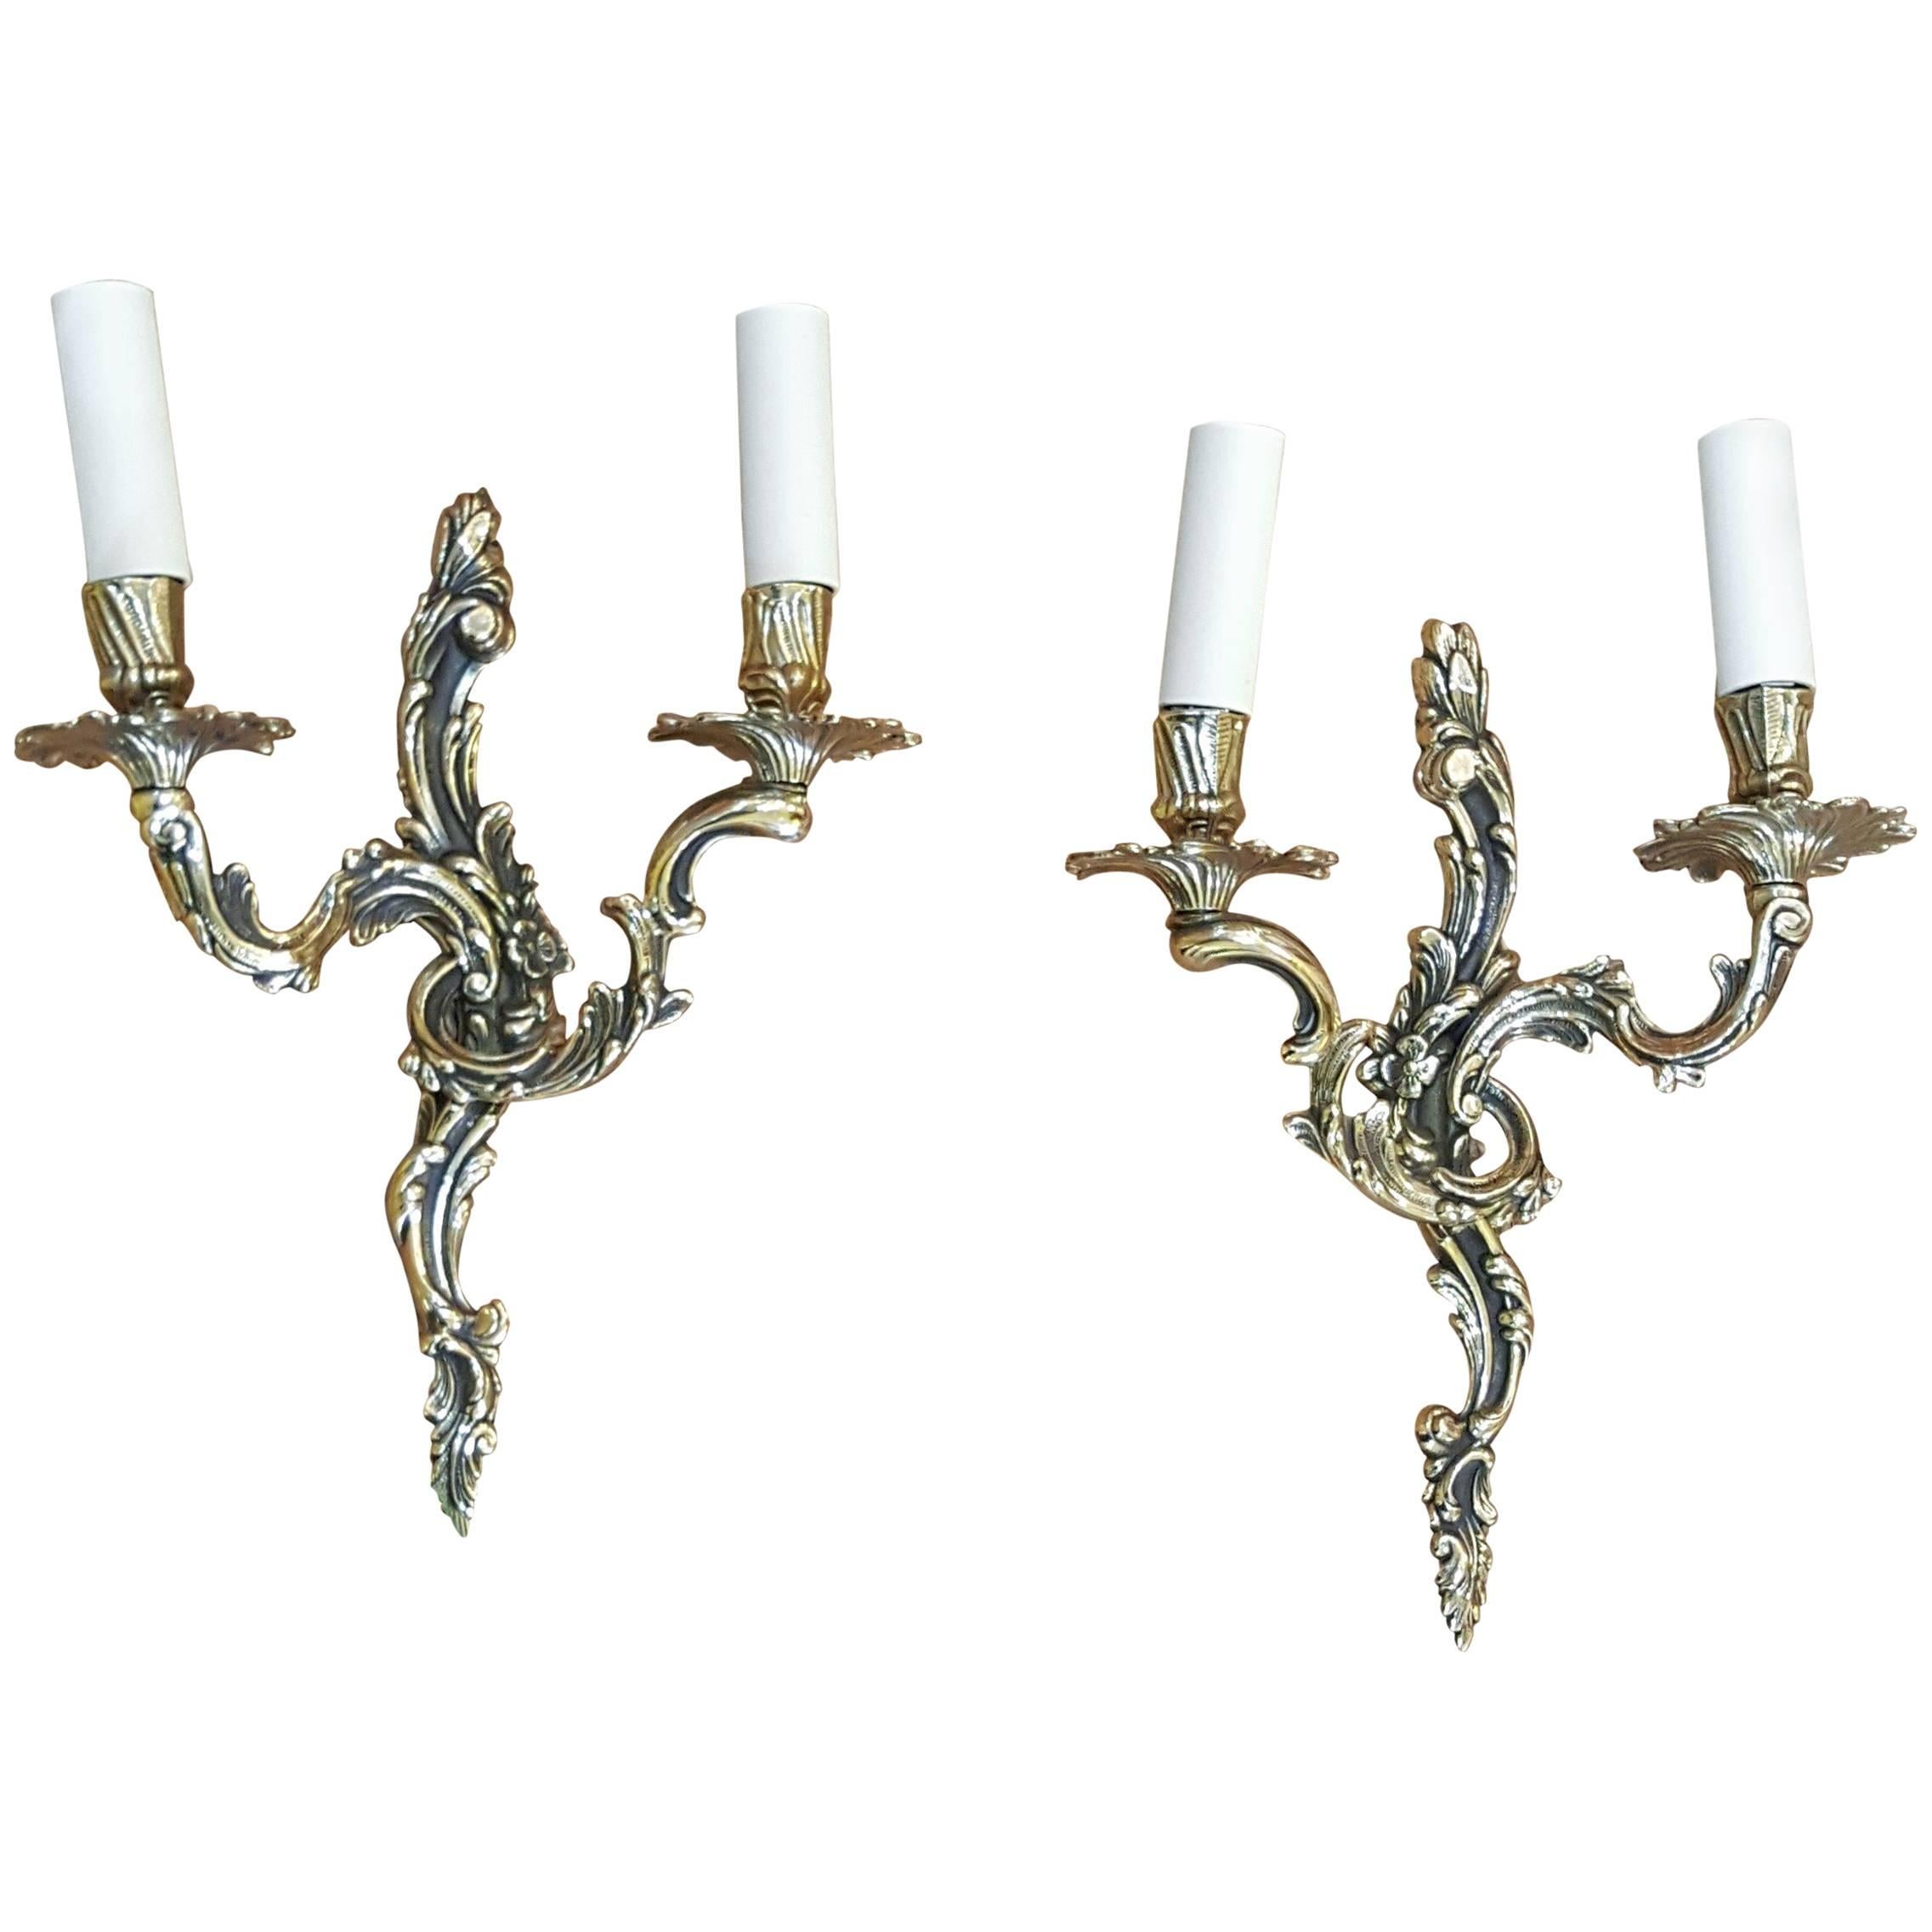 Pair of Edwardian Rococo Style Brass Wall Lights